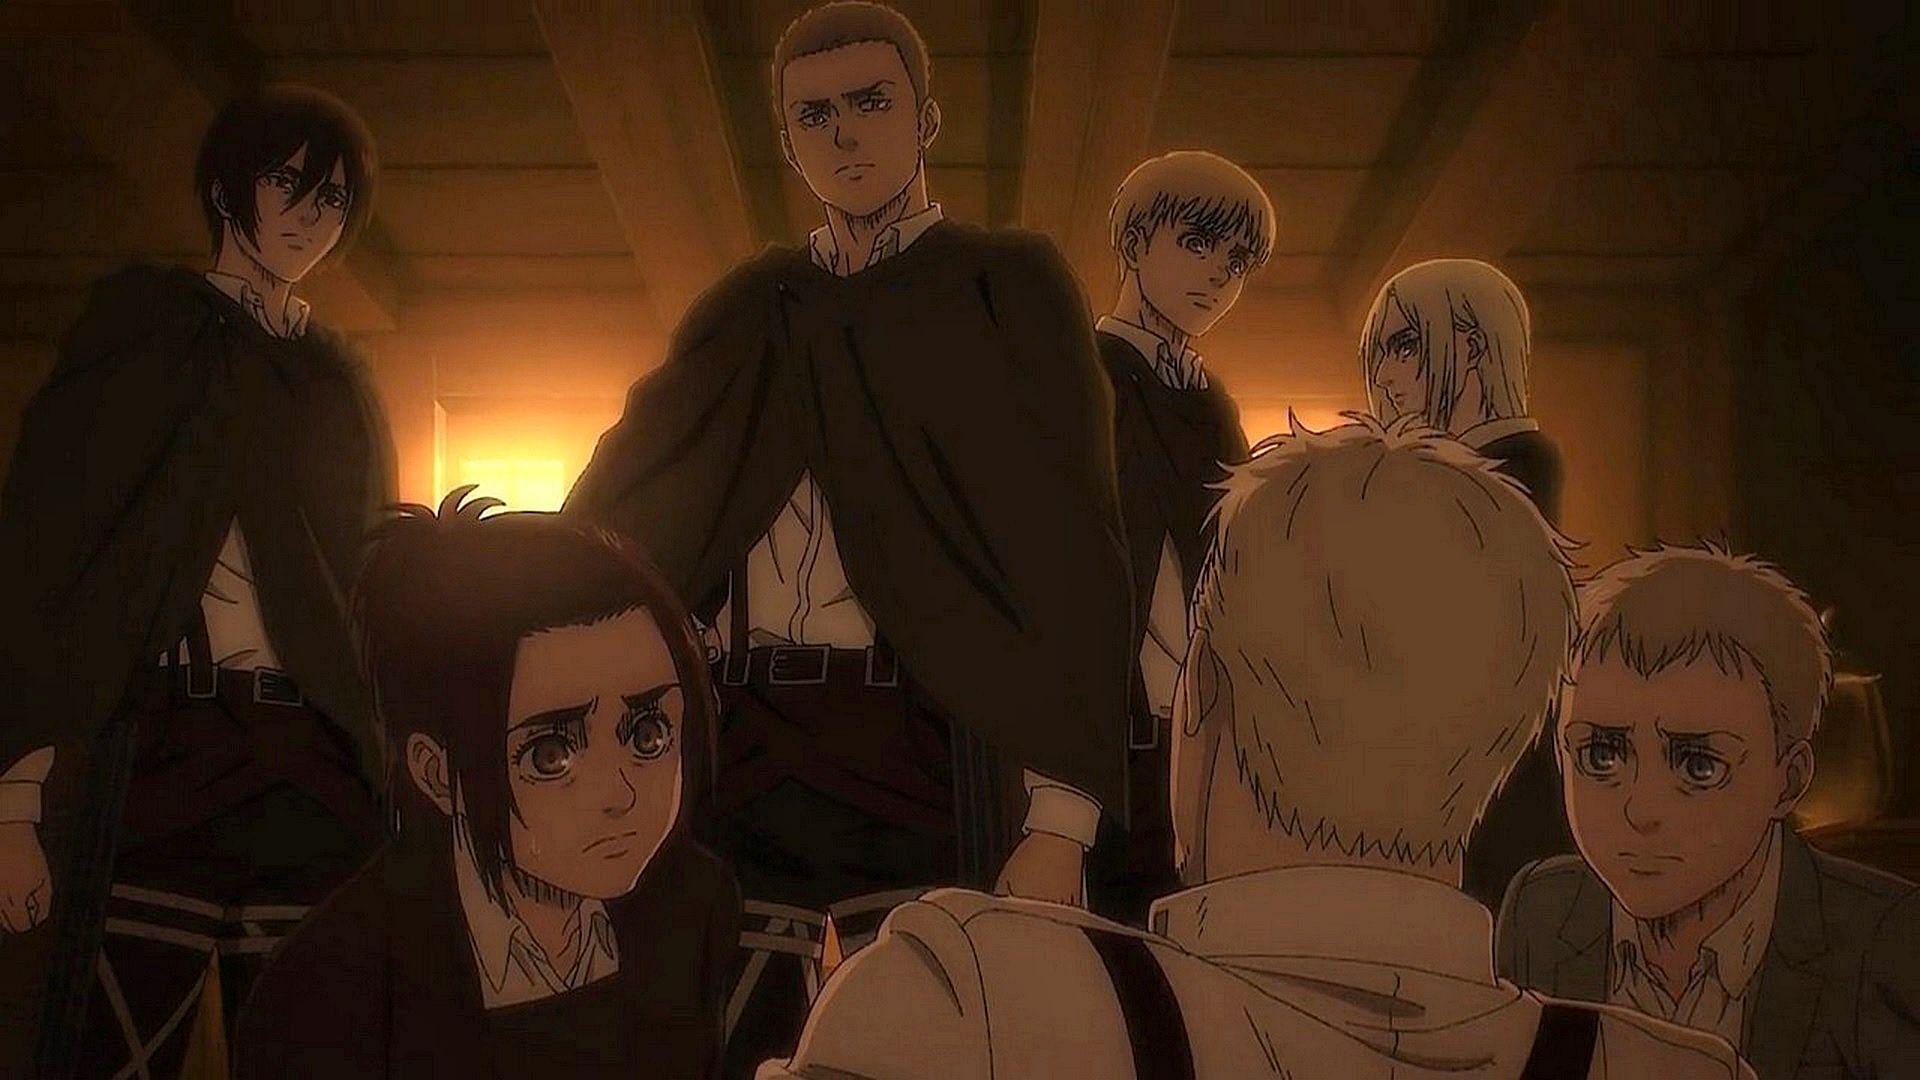 Reiner is reunited with the others in Attack on Titan season 4 part 2 (Image via Studio MAPPA)